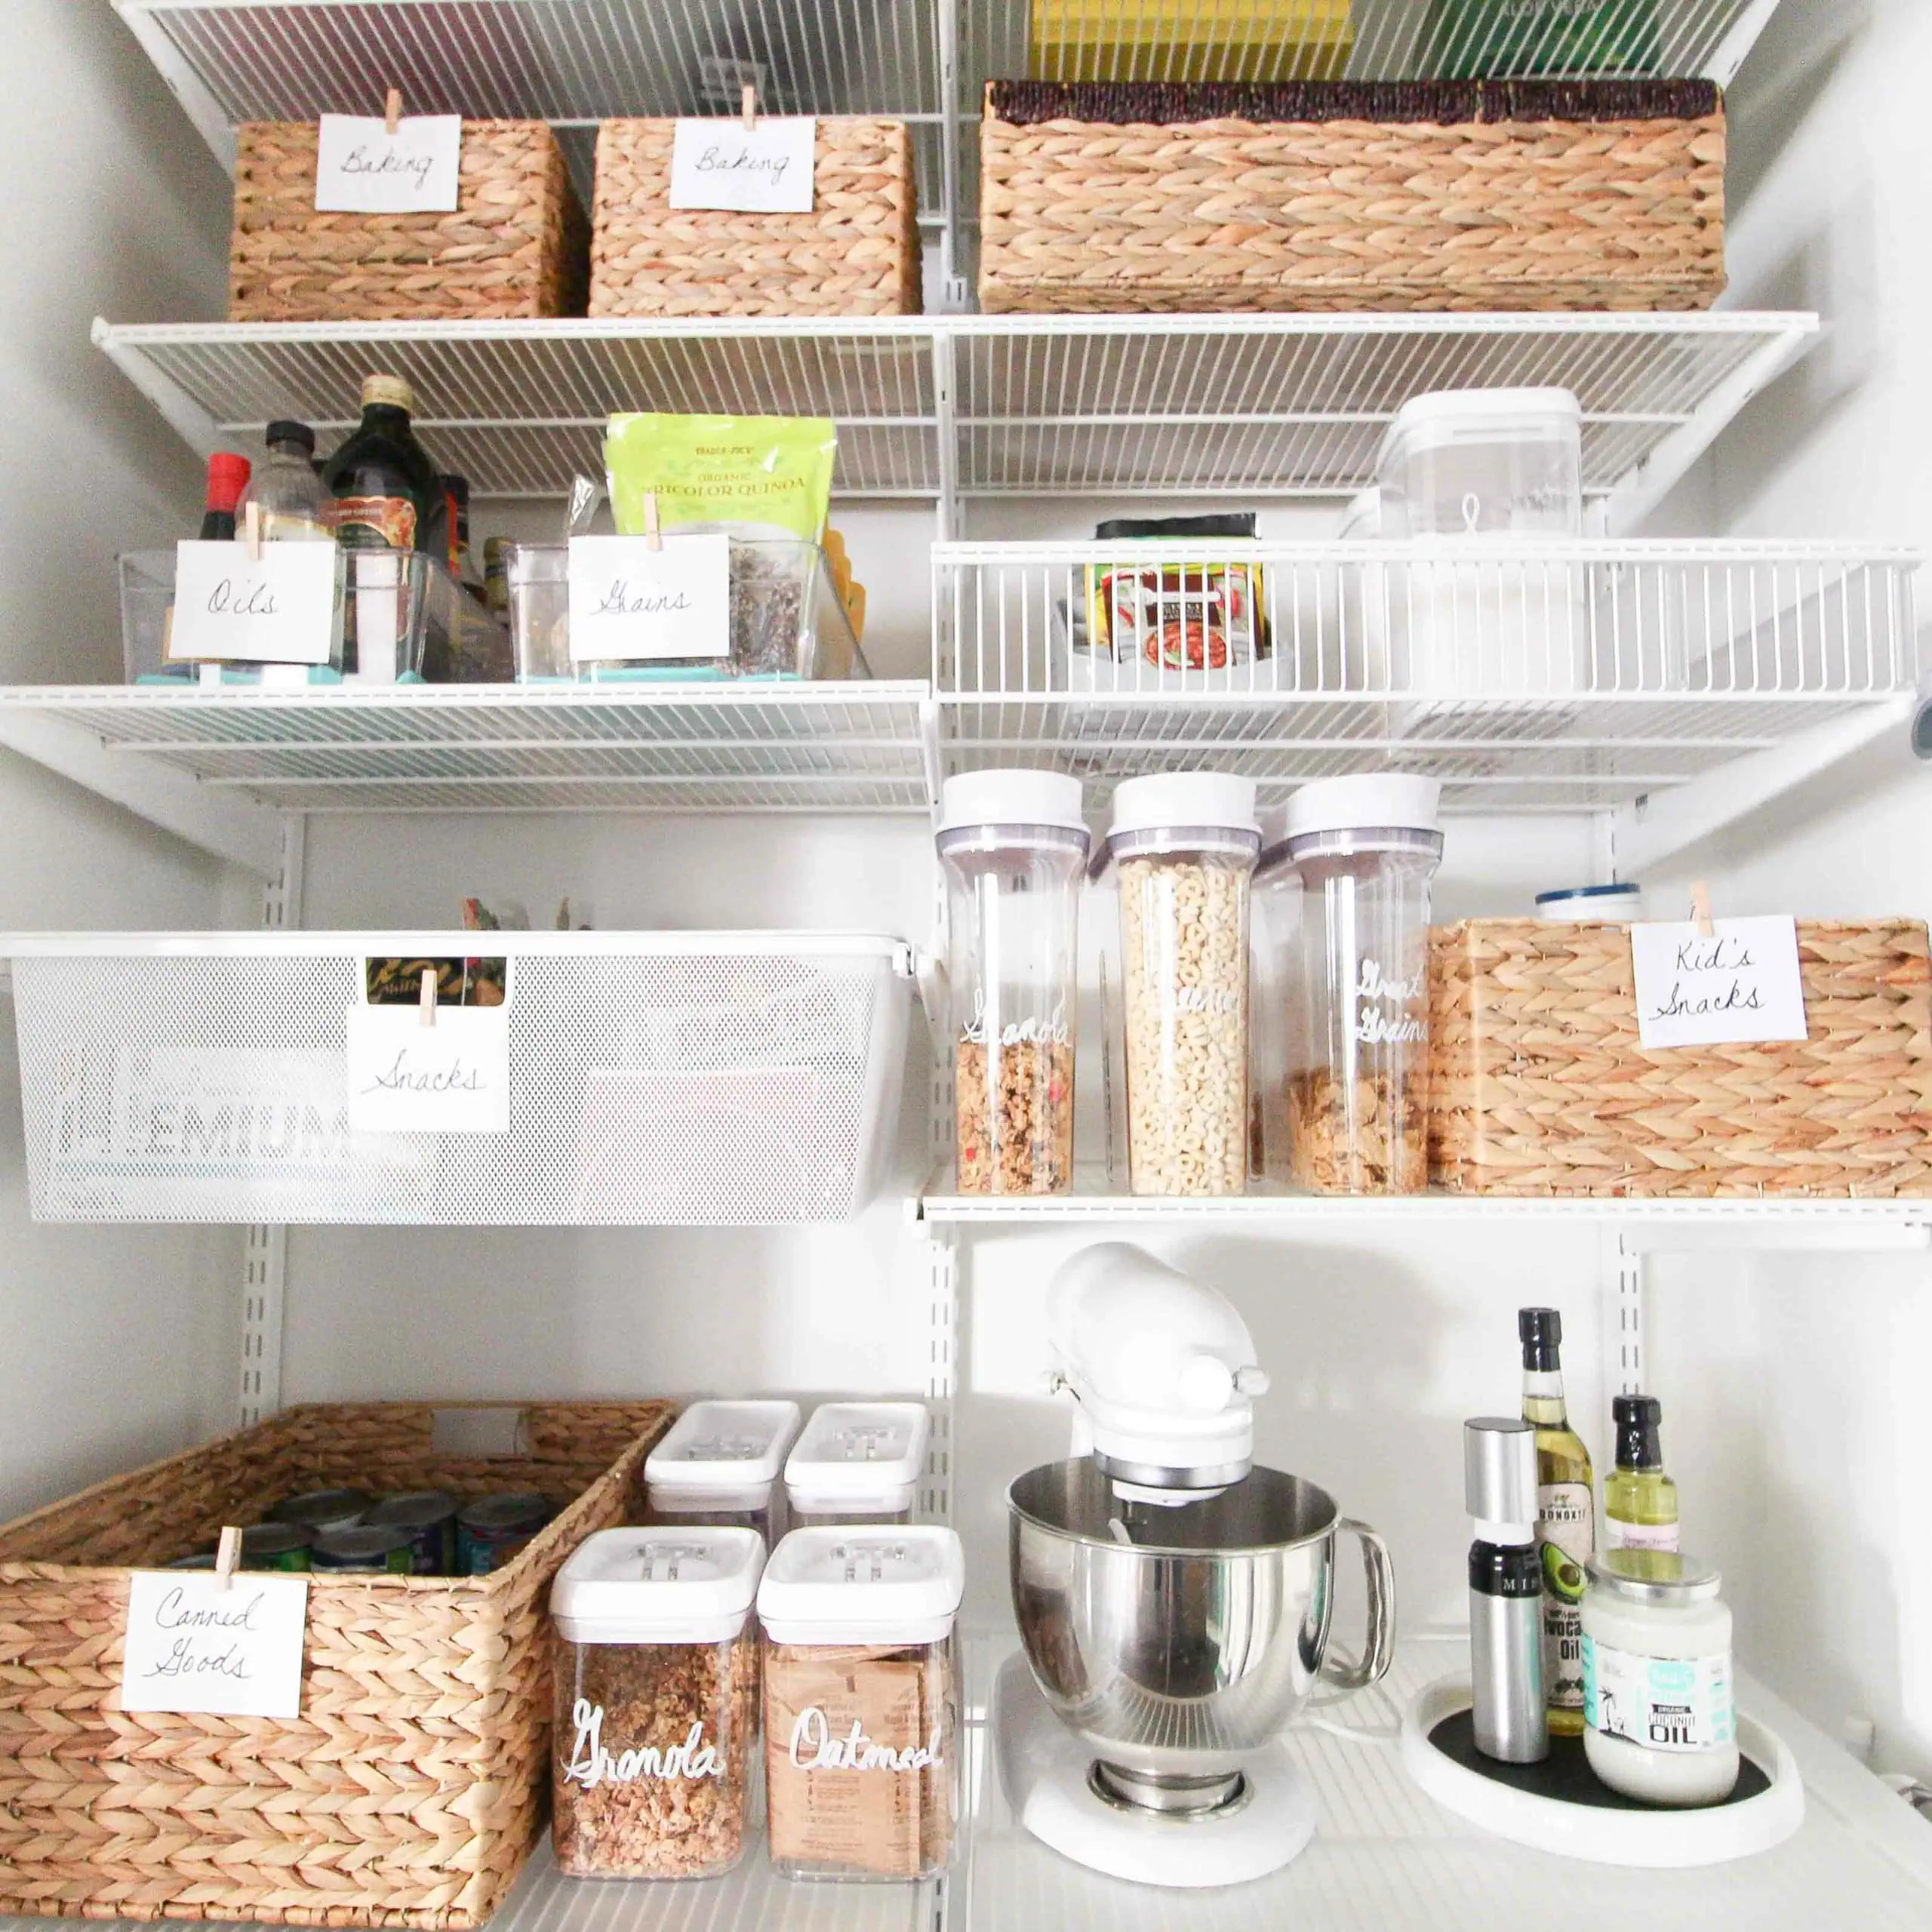 An organized pantry with wicker baskets